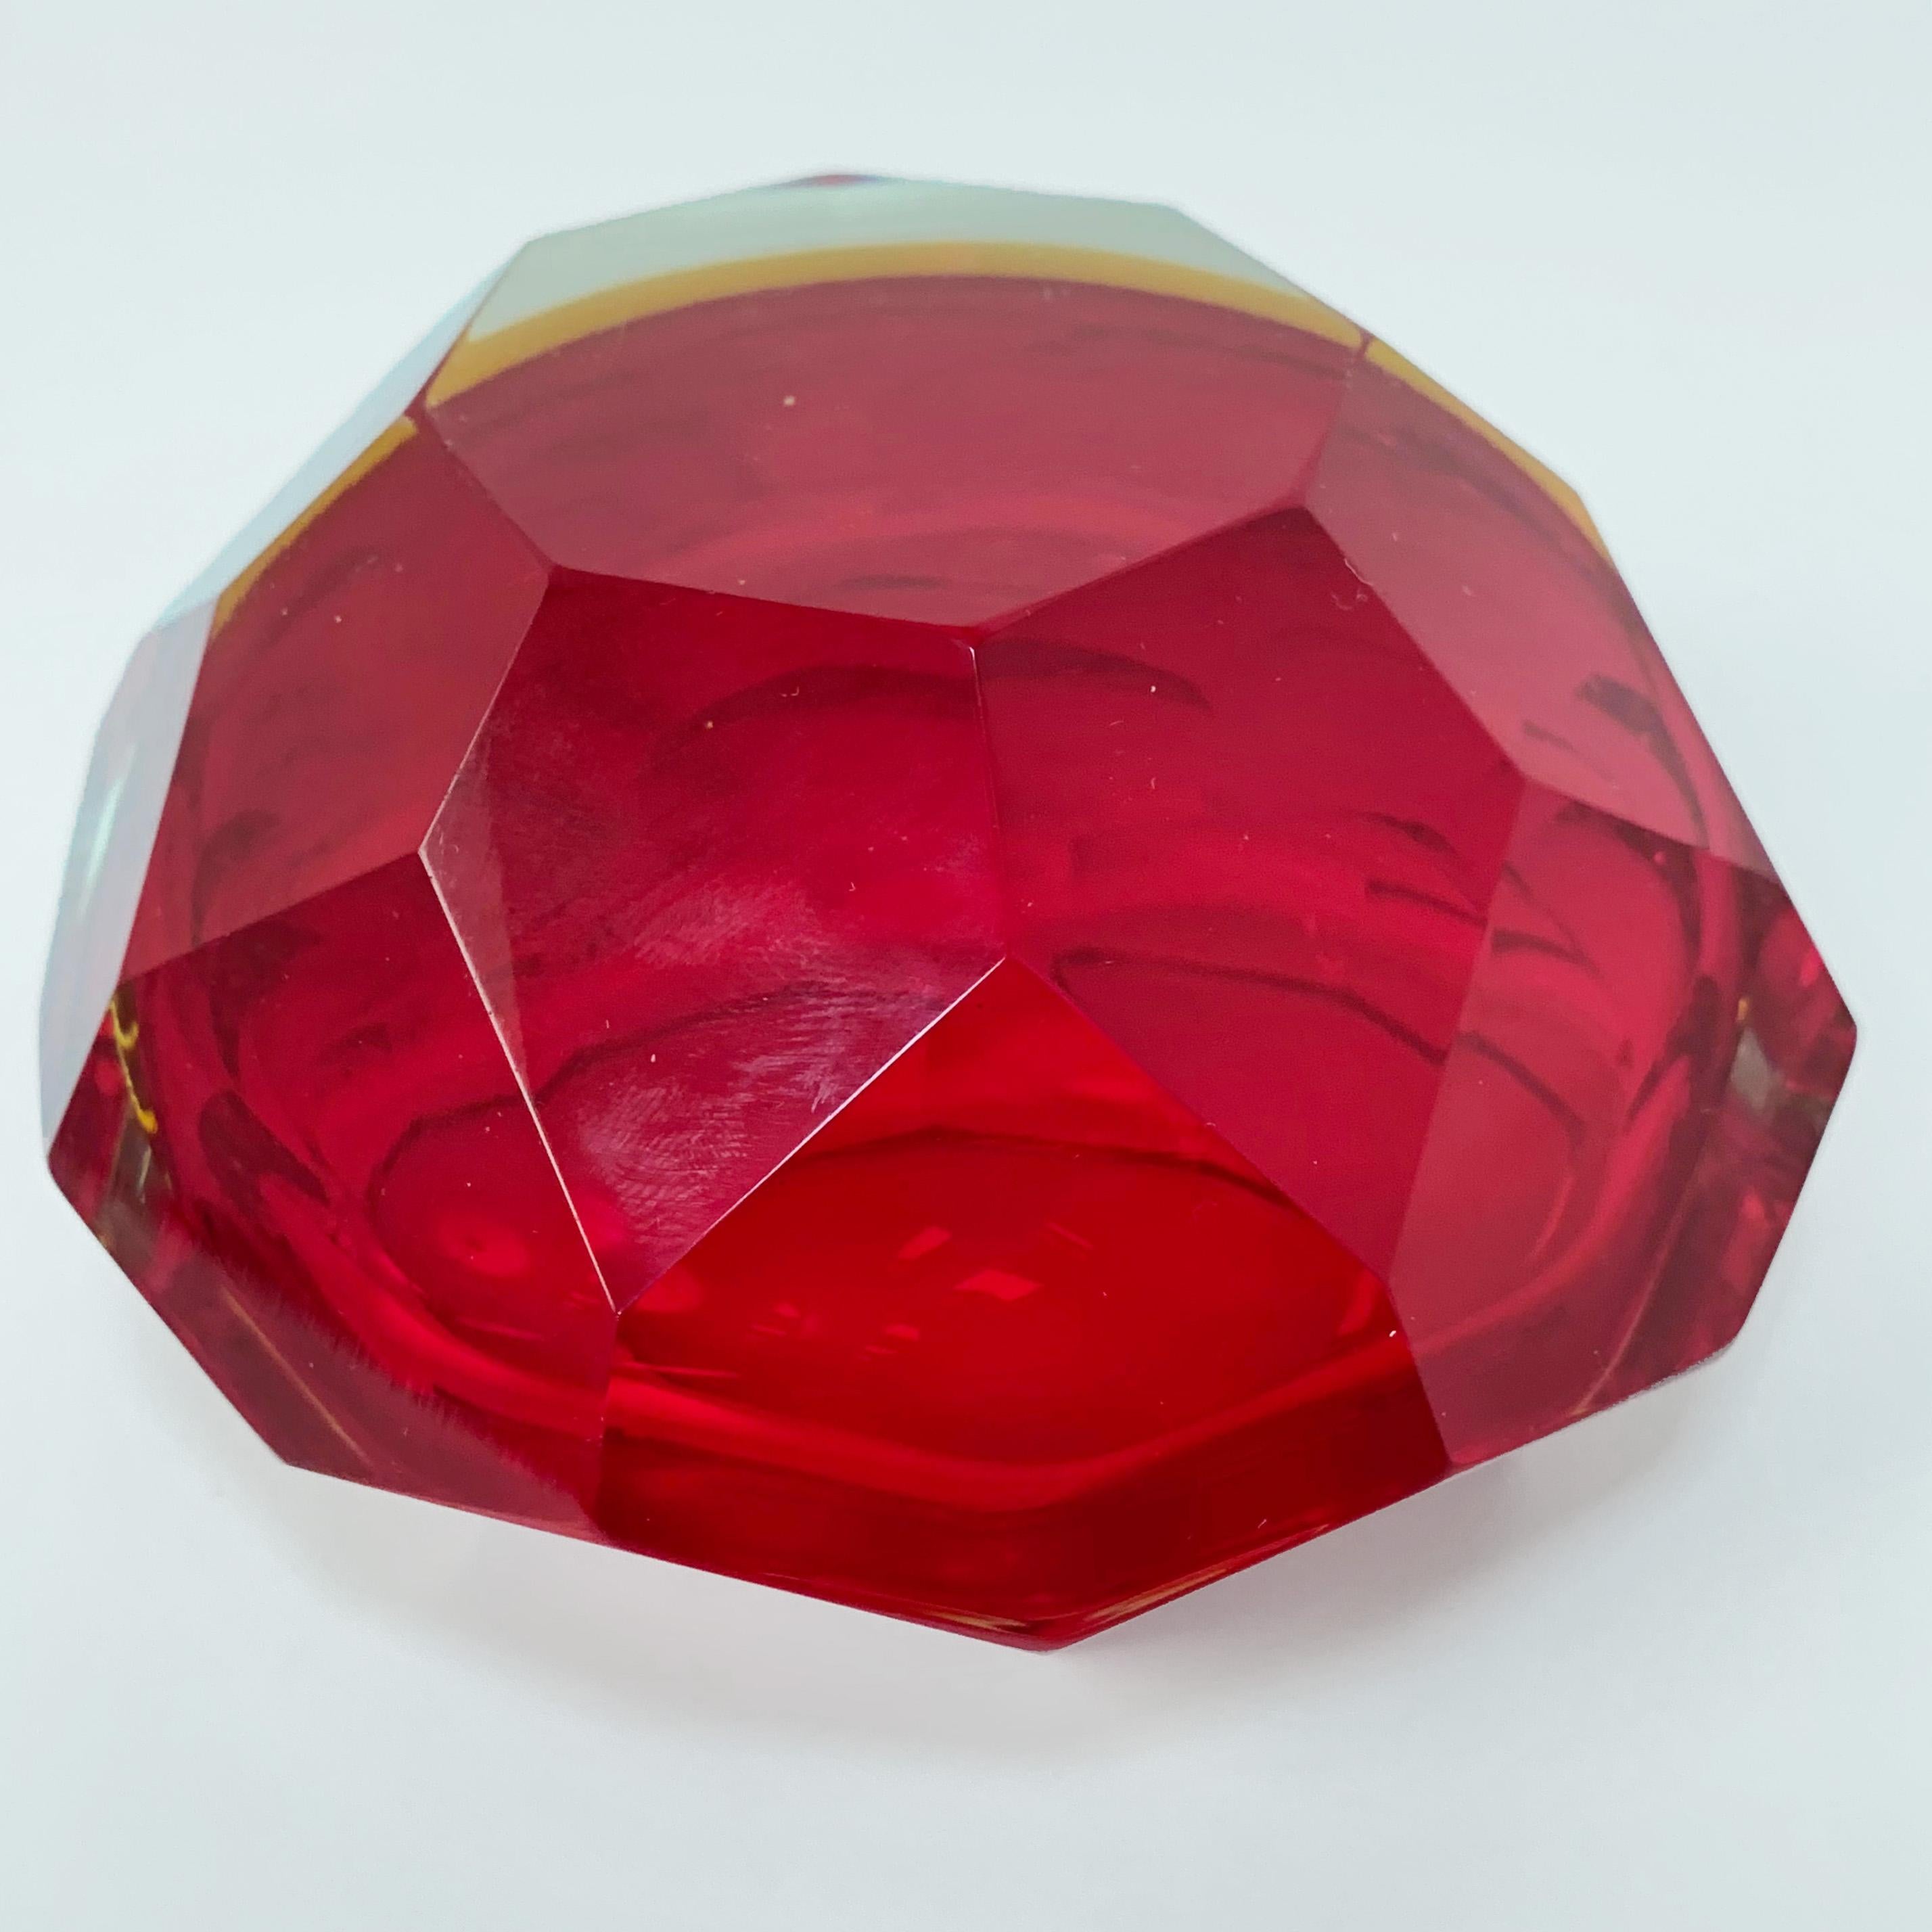 Murano Ashtray, Flavio Poli, Submerged Glass, Red Faceted Glass, Italy, 1950s For Sale 1